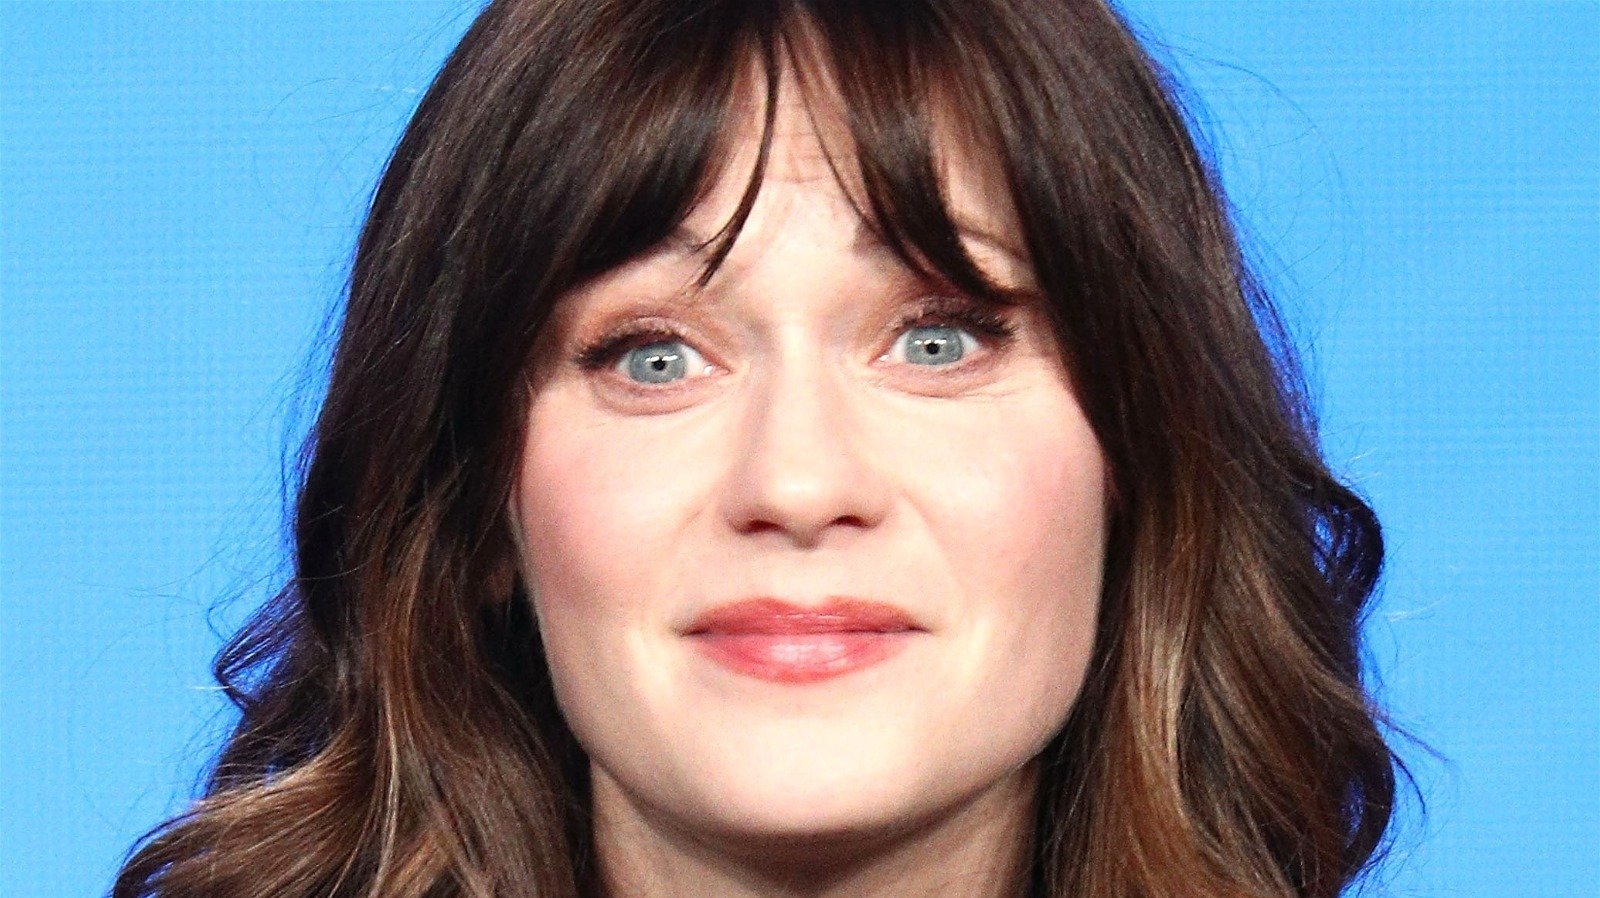 The Raunchy Comedy That Ruined Zooey Deschanel's Career